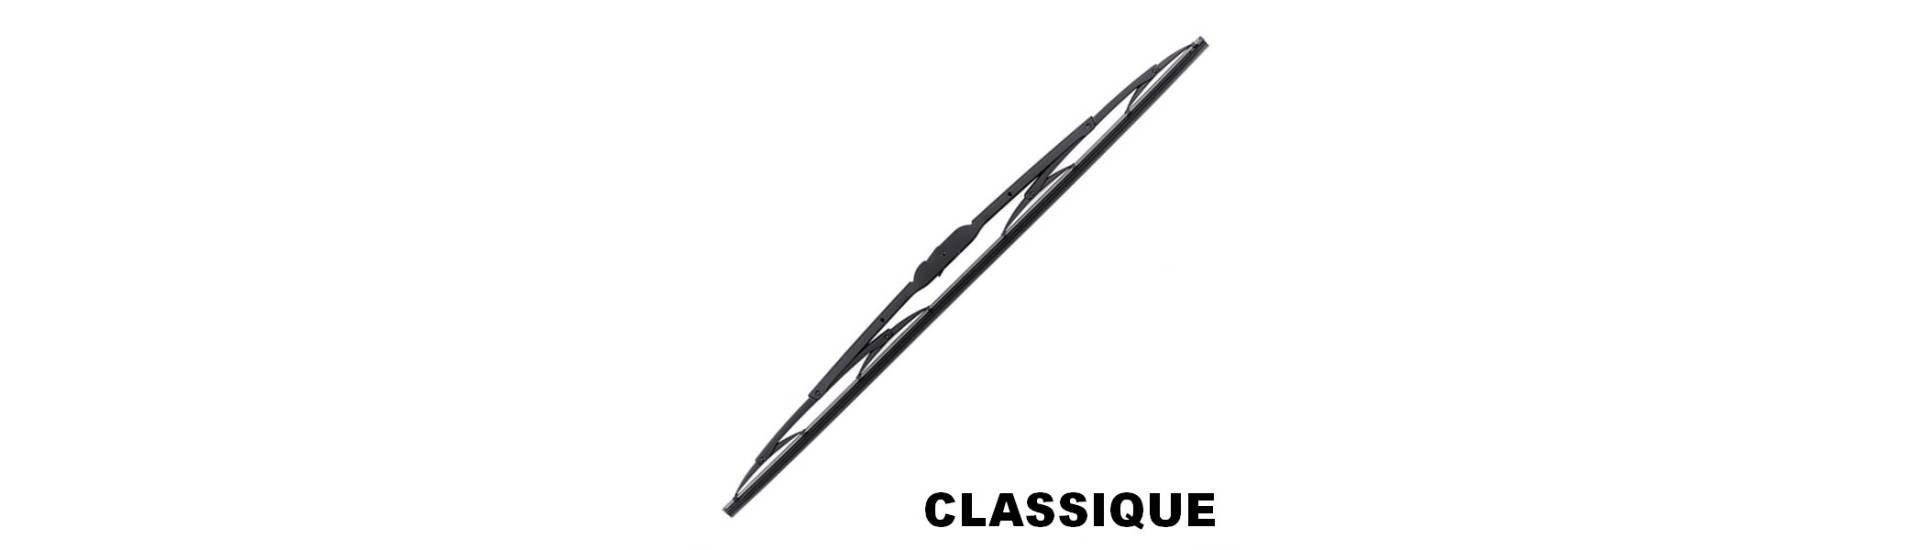 Classic wiper blade at the best price car without a license